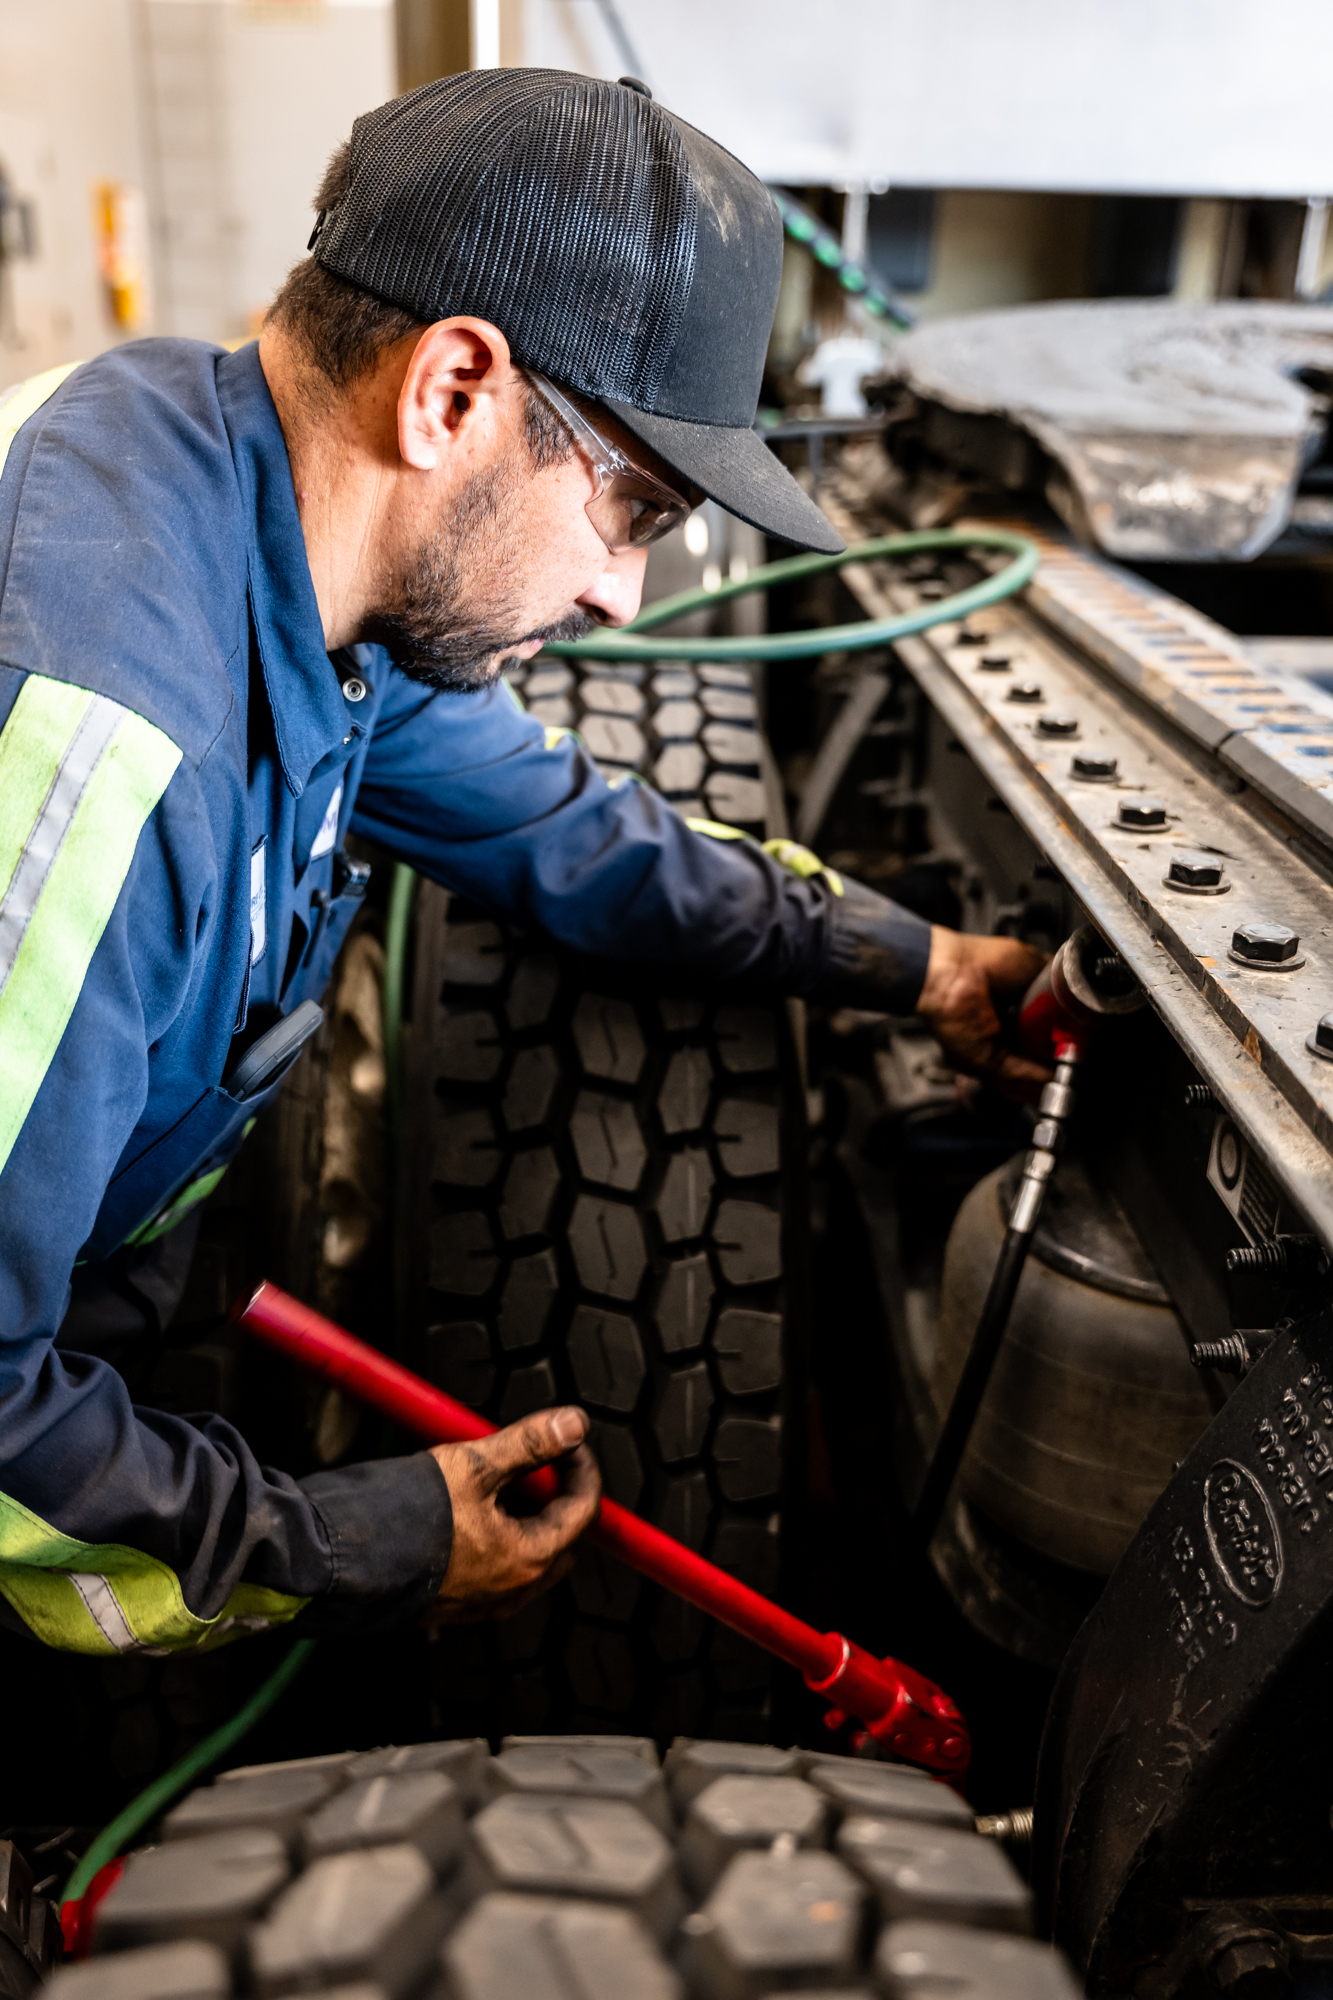 East Bay Tire employee servicing a vehicle